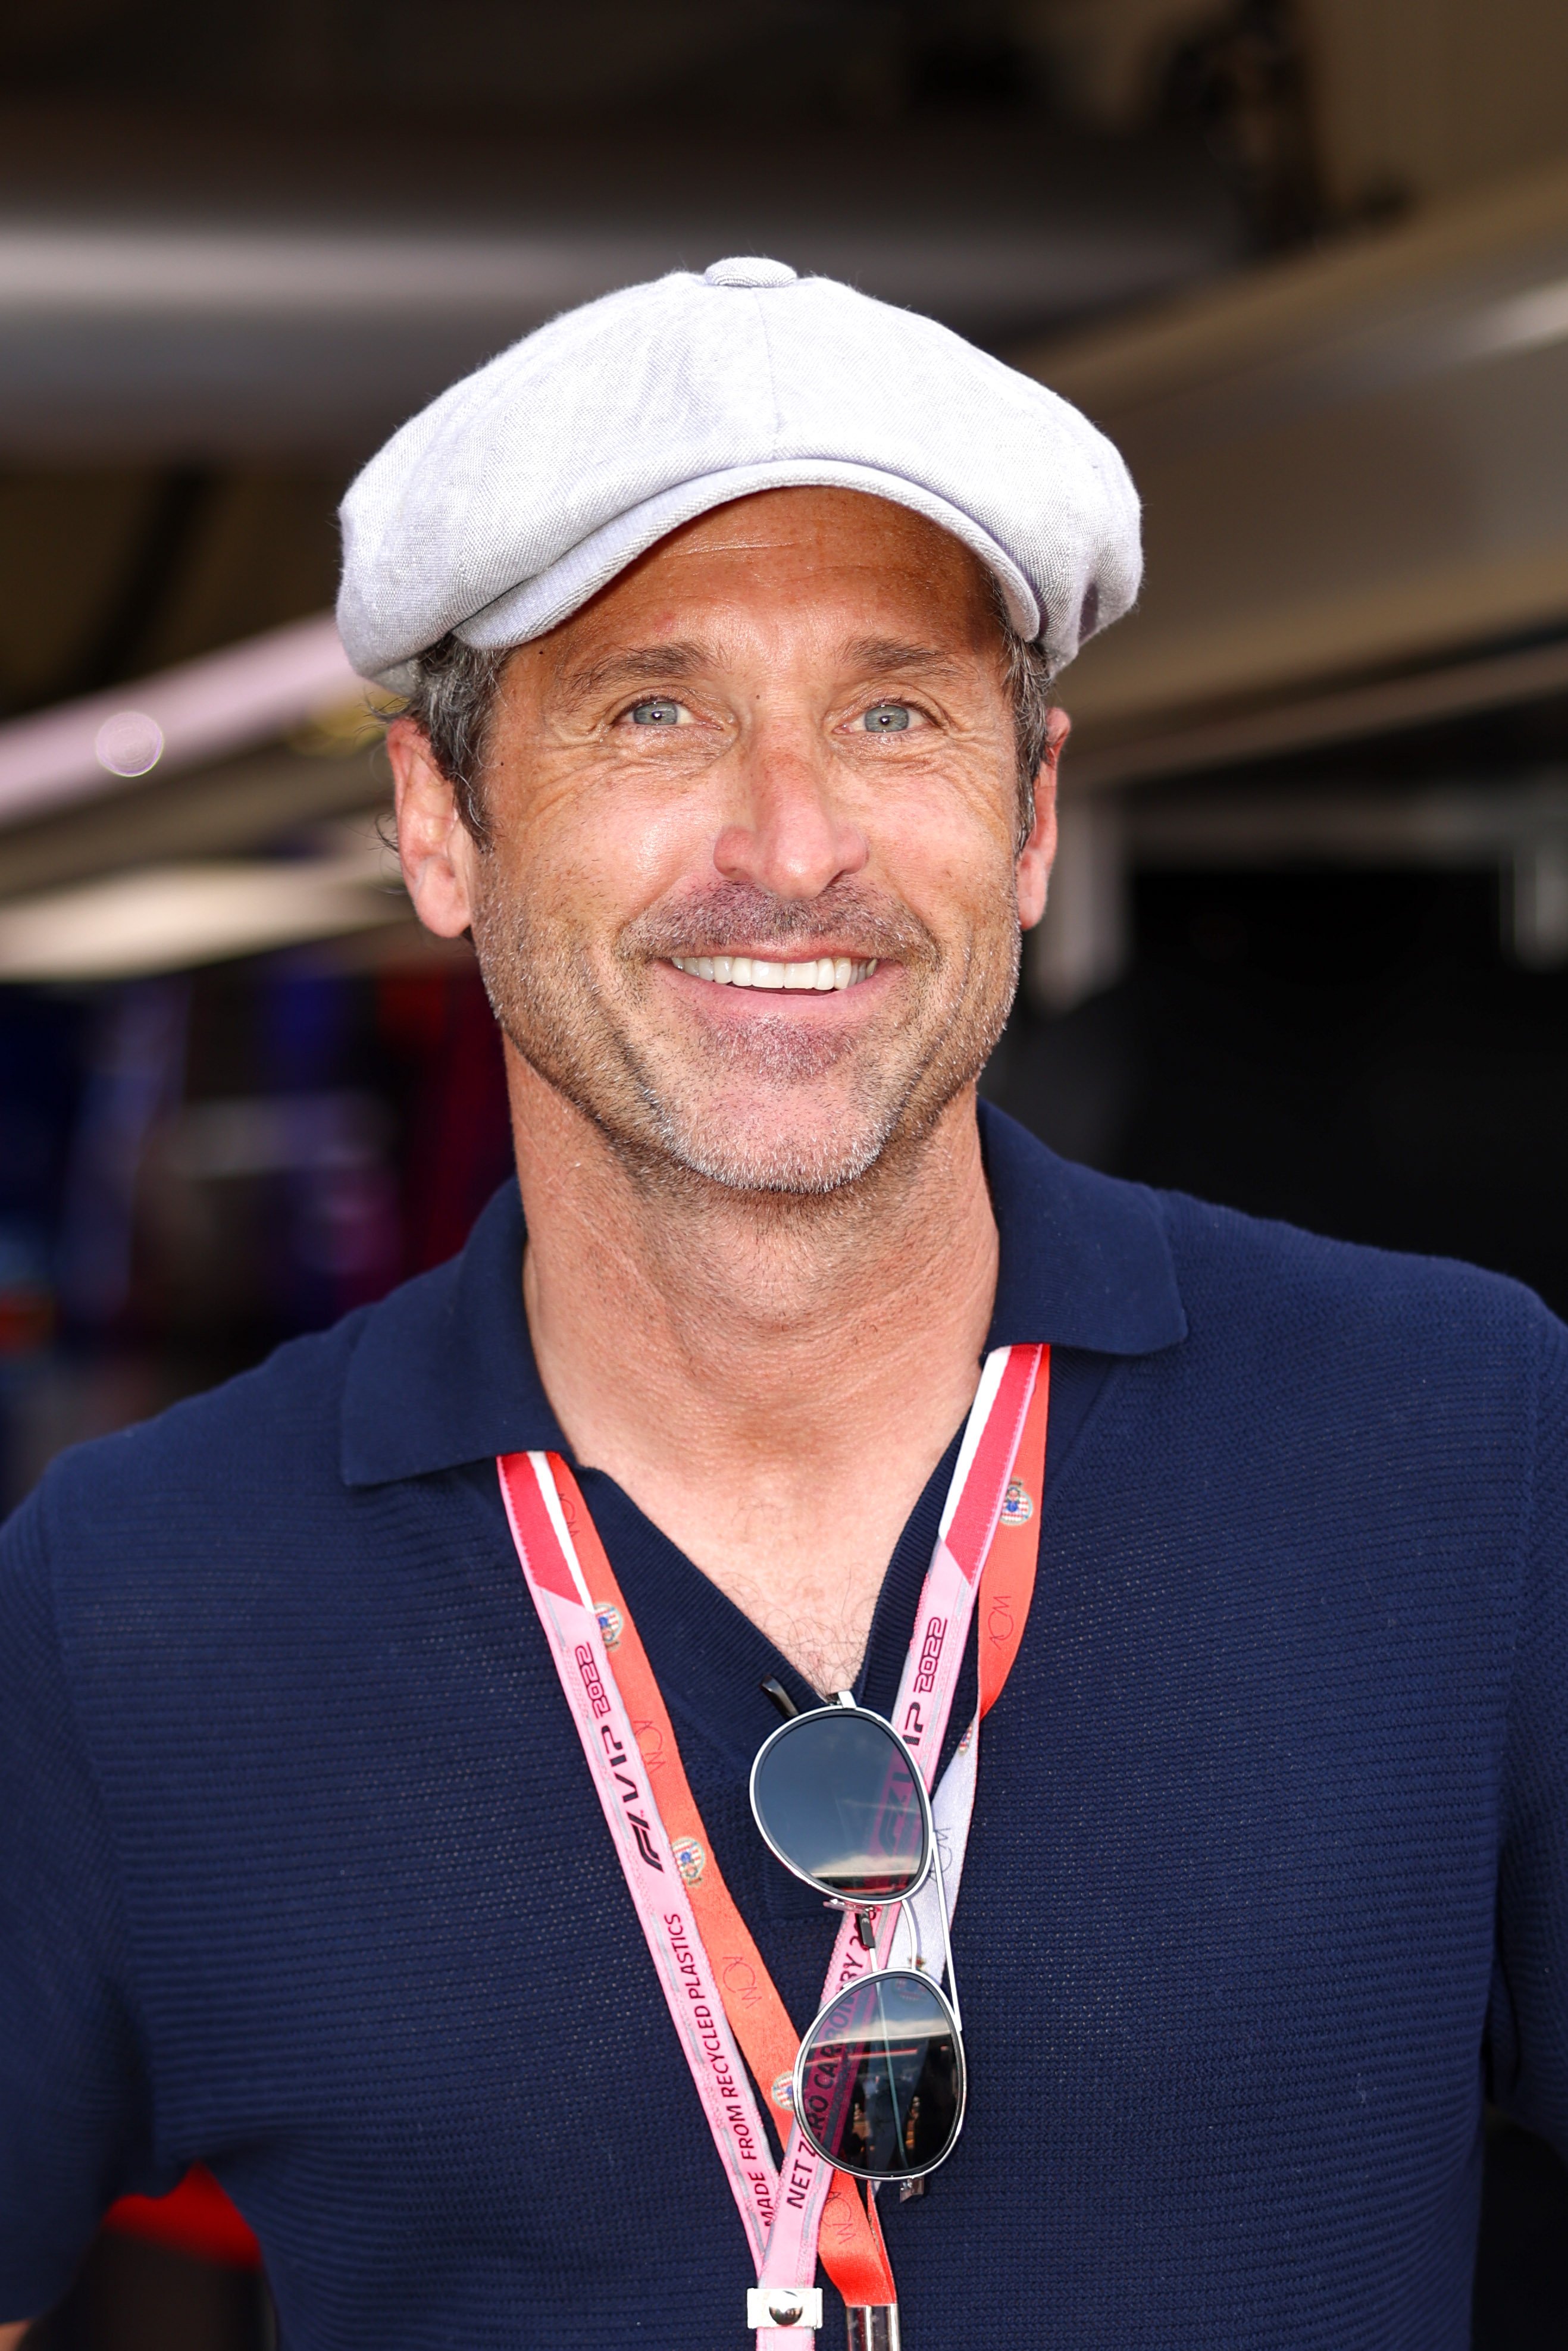 Patrick Dempsey attends qualifying ahead of the F1 Grand Prix of Monaco at Circuit de Monaco on May 28, 2022, in Monte-Carlo, Monaco. | Source: Getty Images